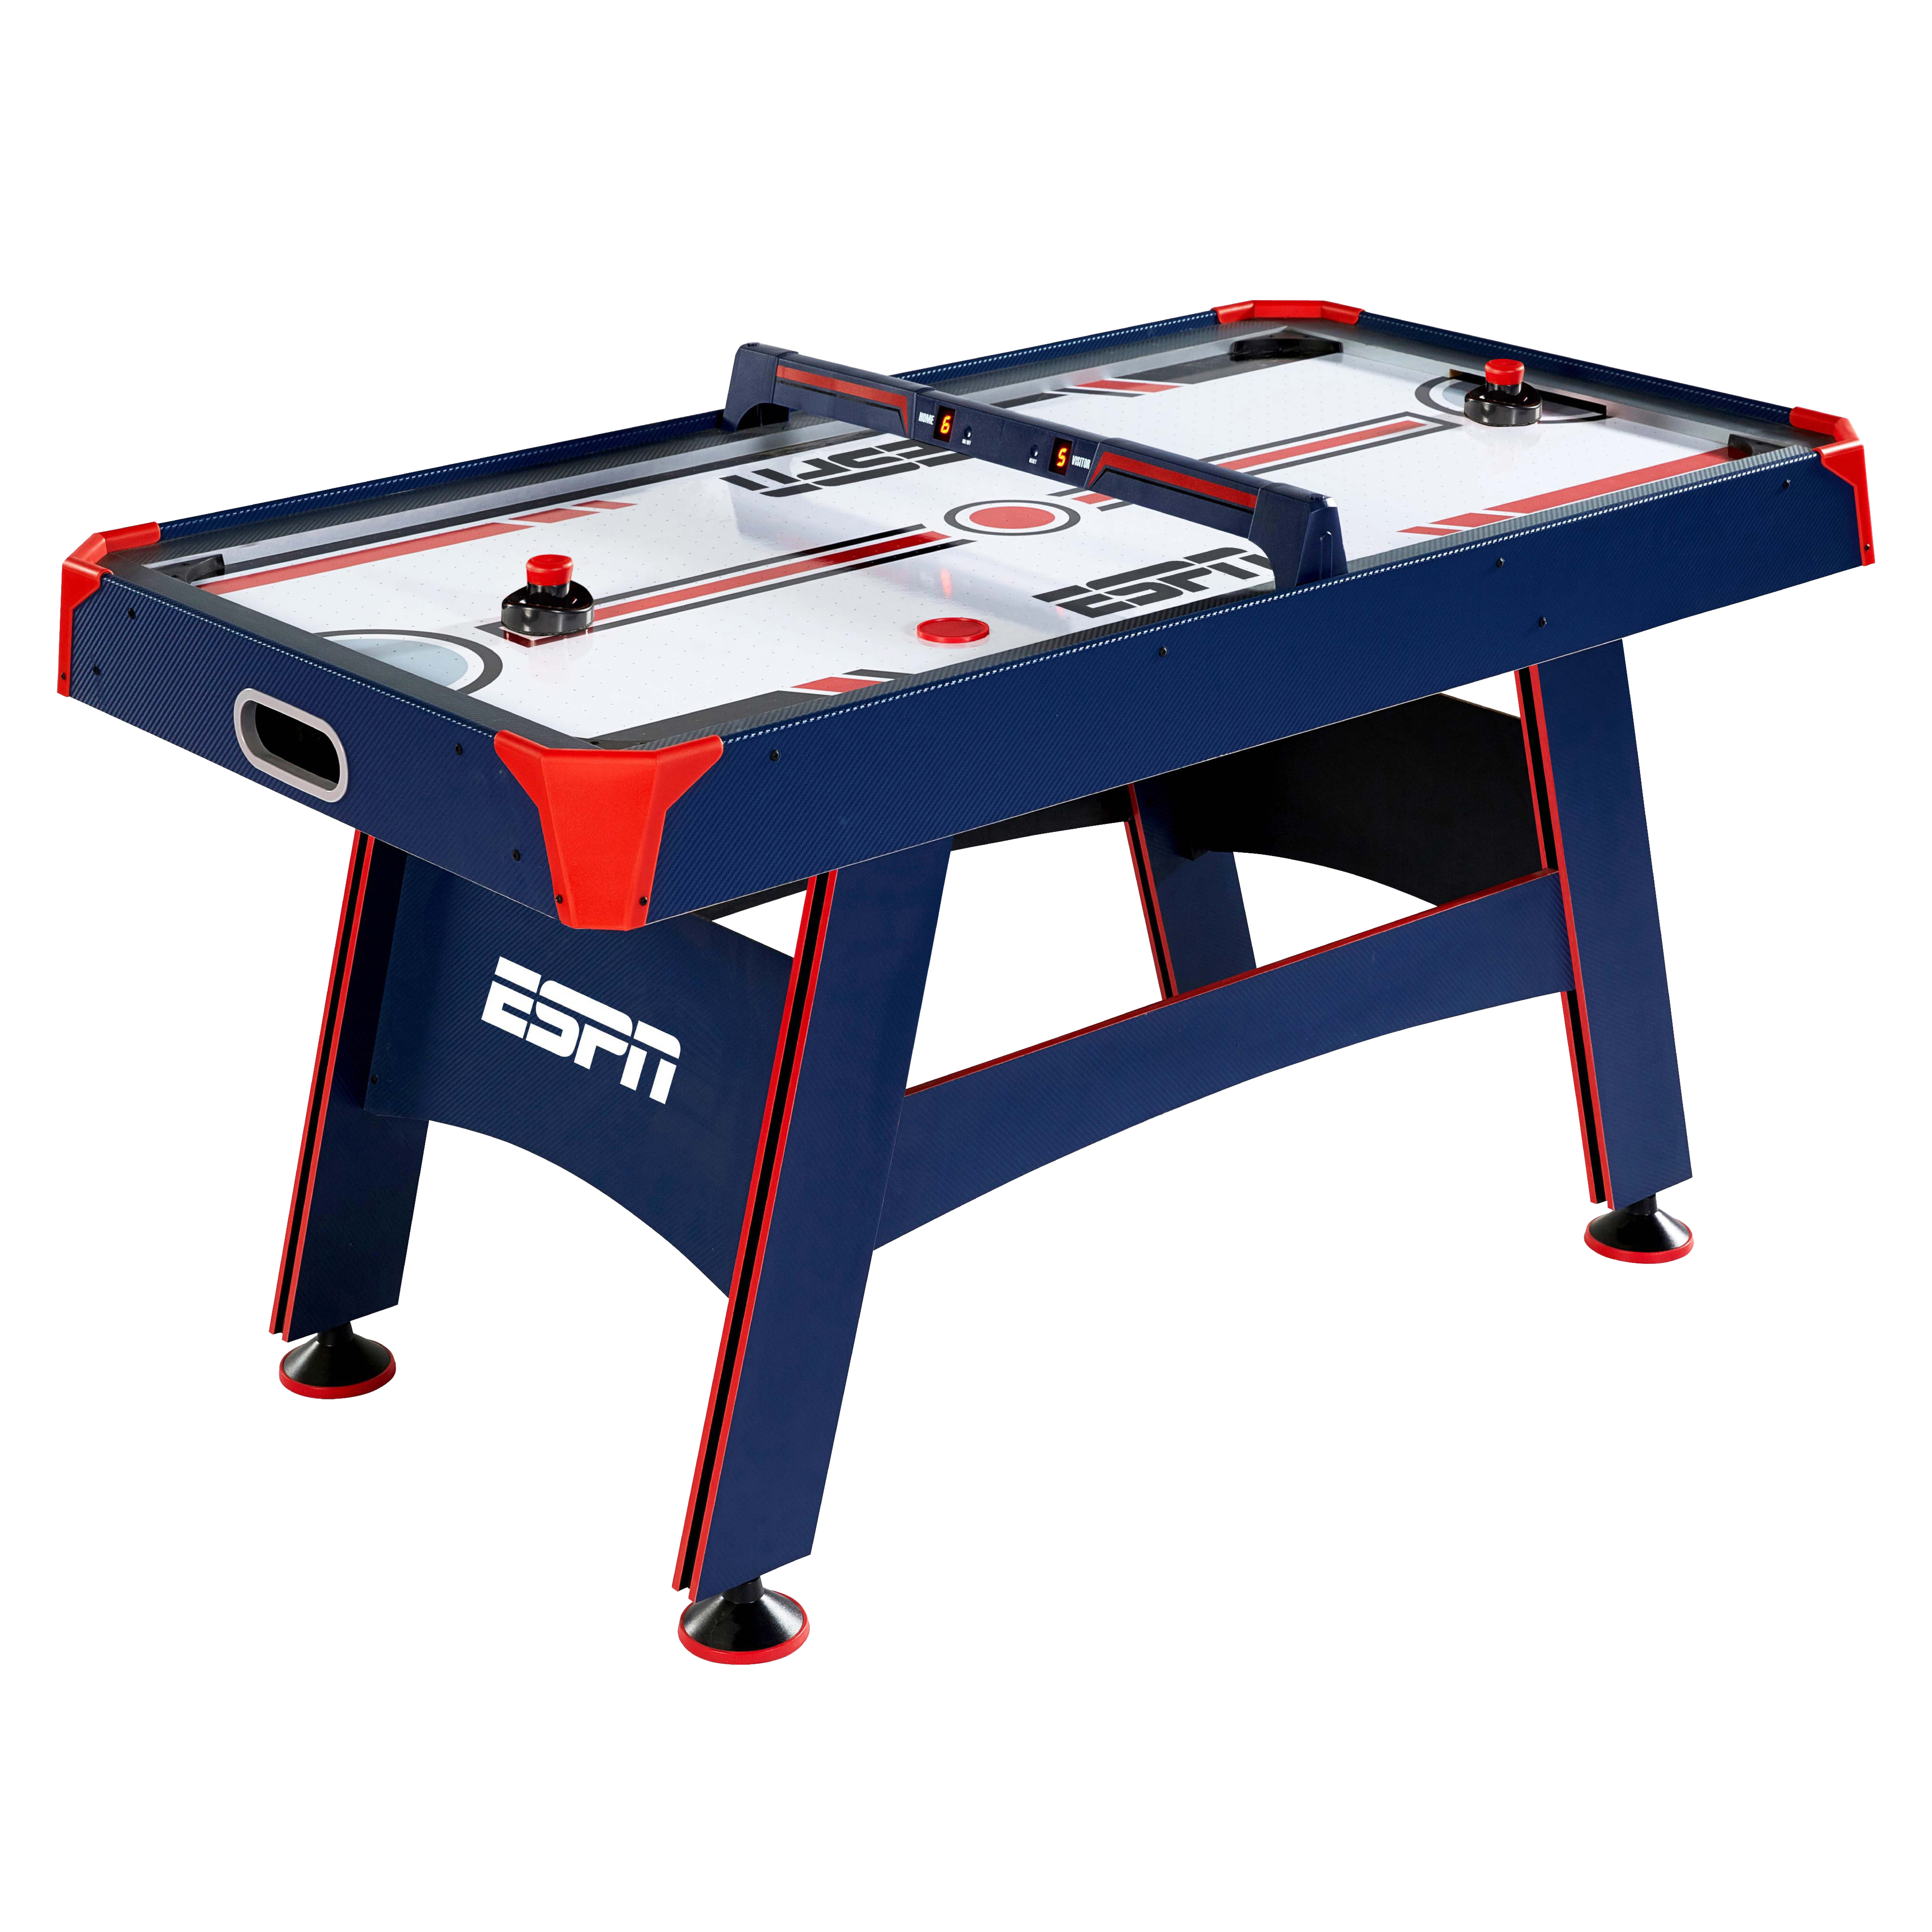 ESPN Air Powered Hockey Table with Overhead Electronic Scorer, 60" x 32" x 32" - image 1 of 11